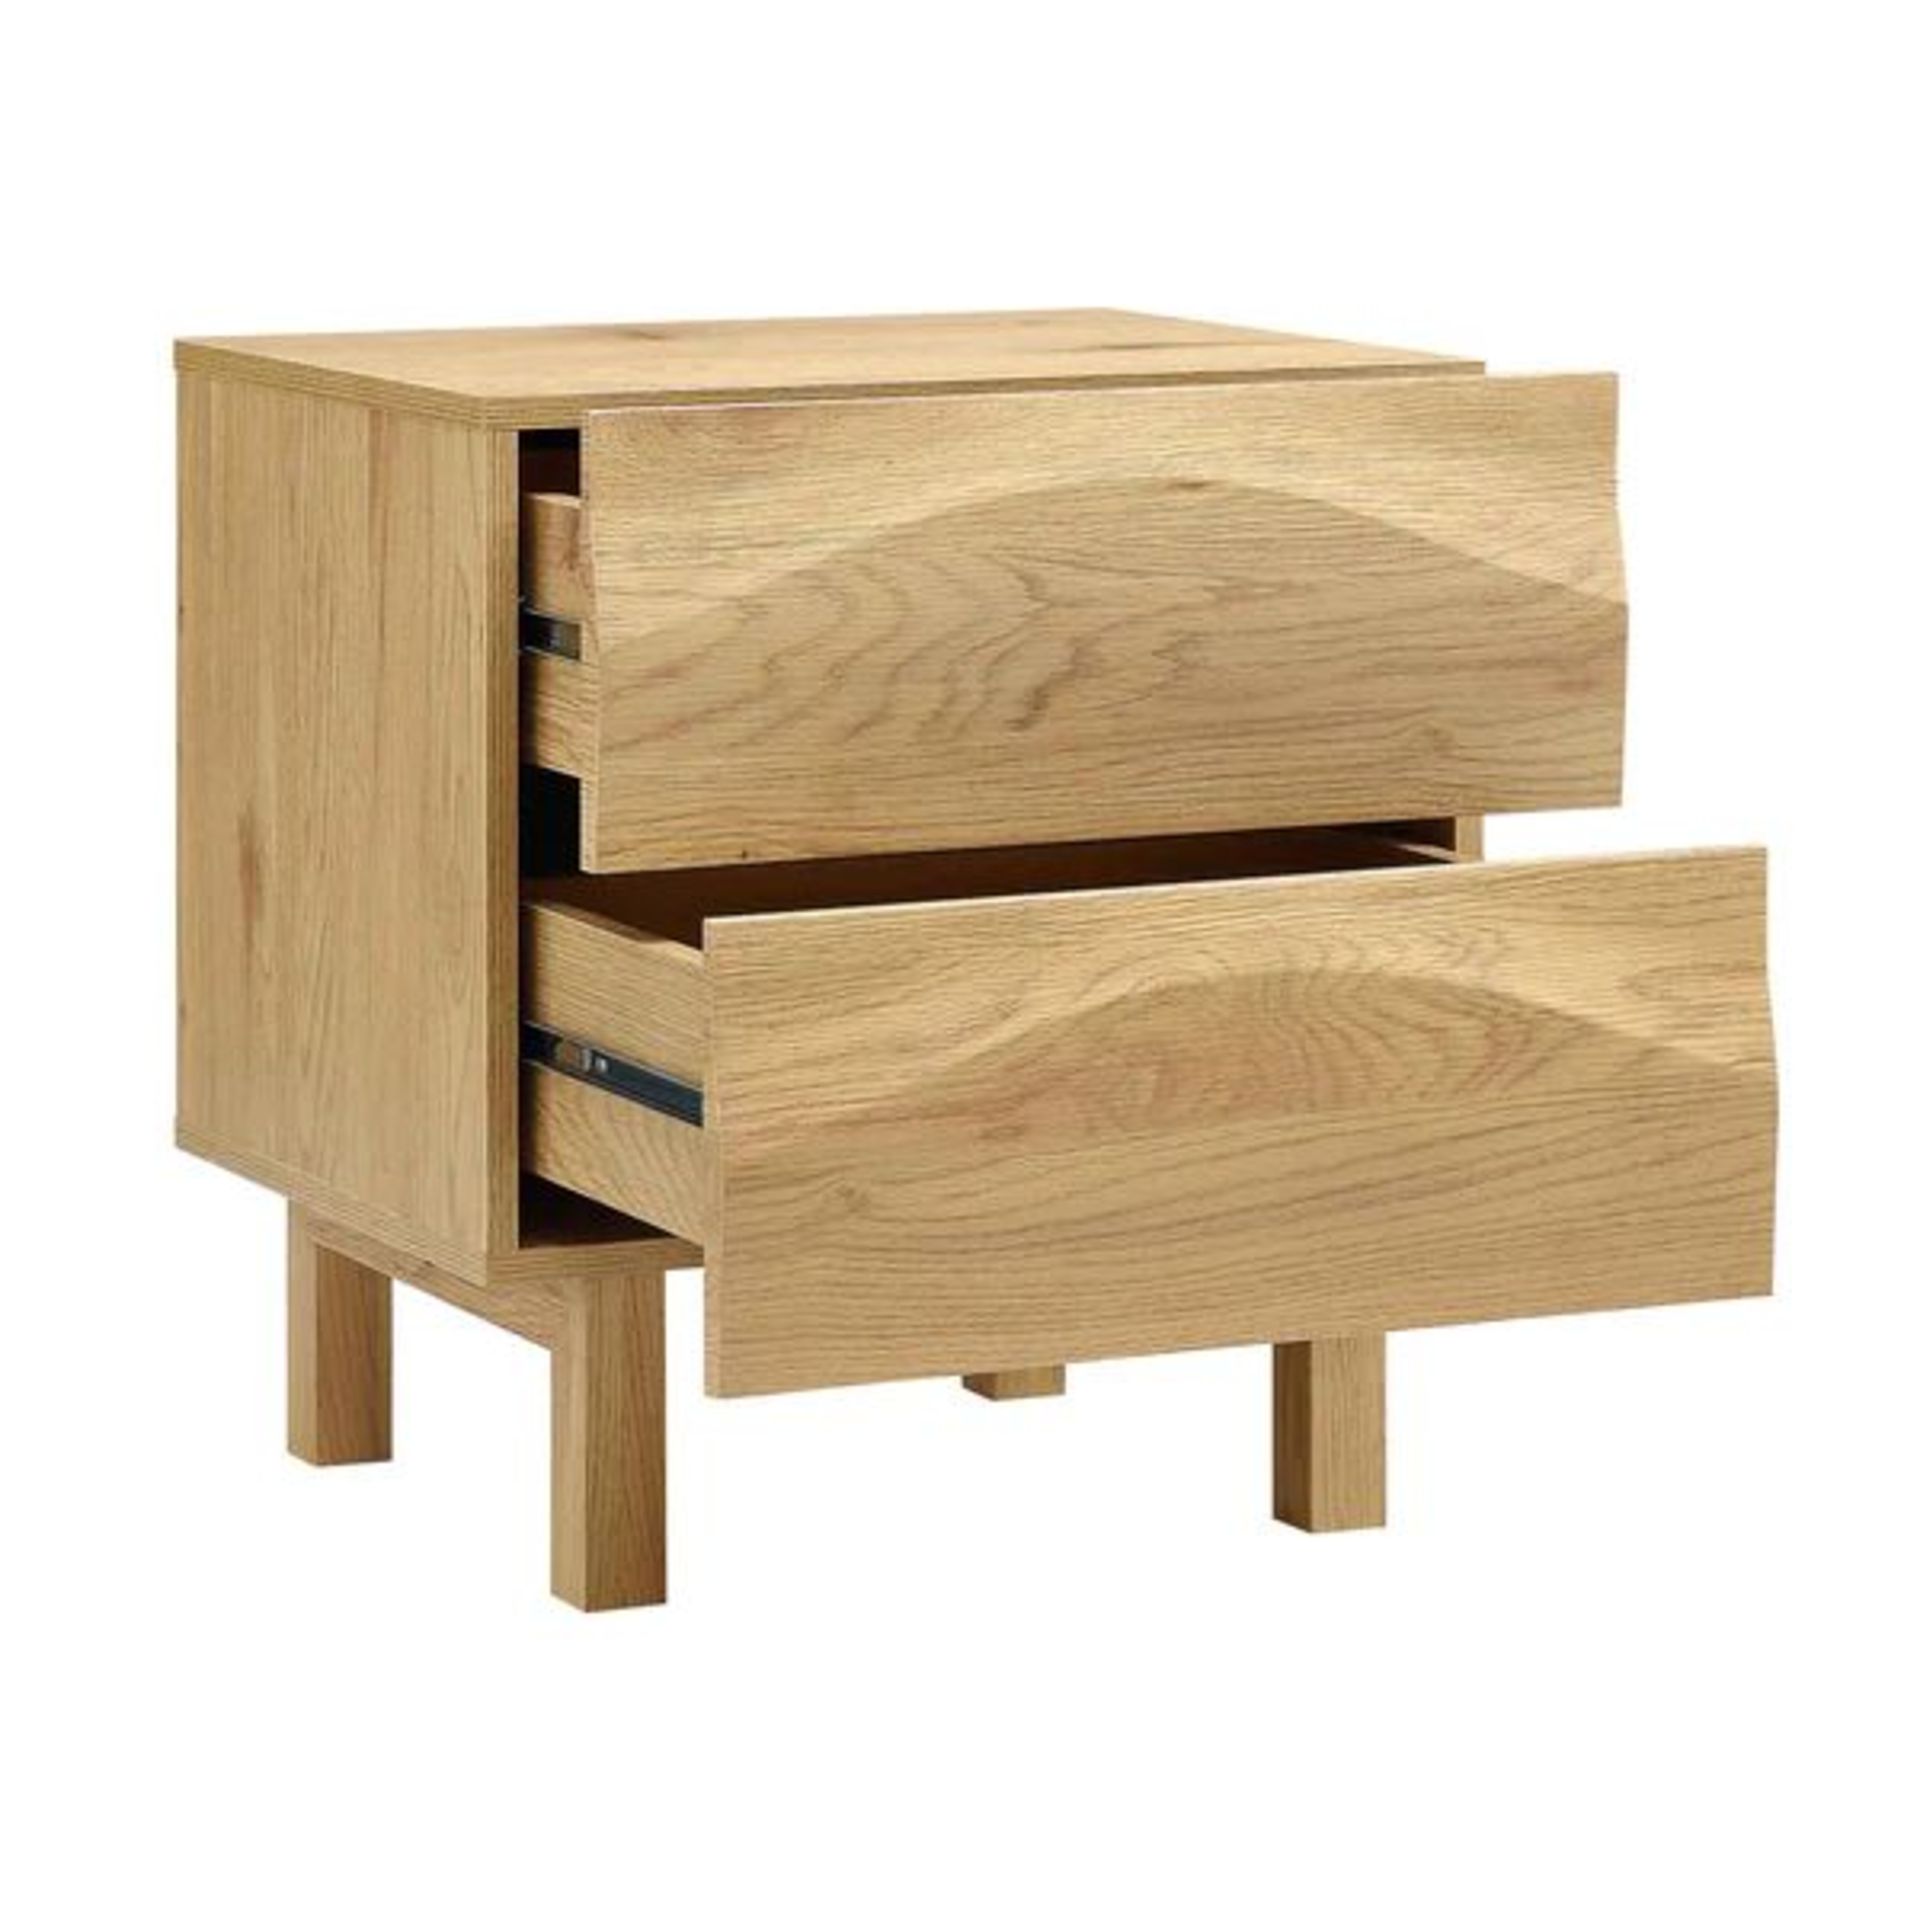 Moriko 2 Drawer Bedside Table. - R19.6. The unique sculptural facade features flowing waves across - Image 2 of 2